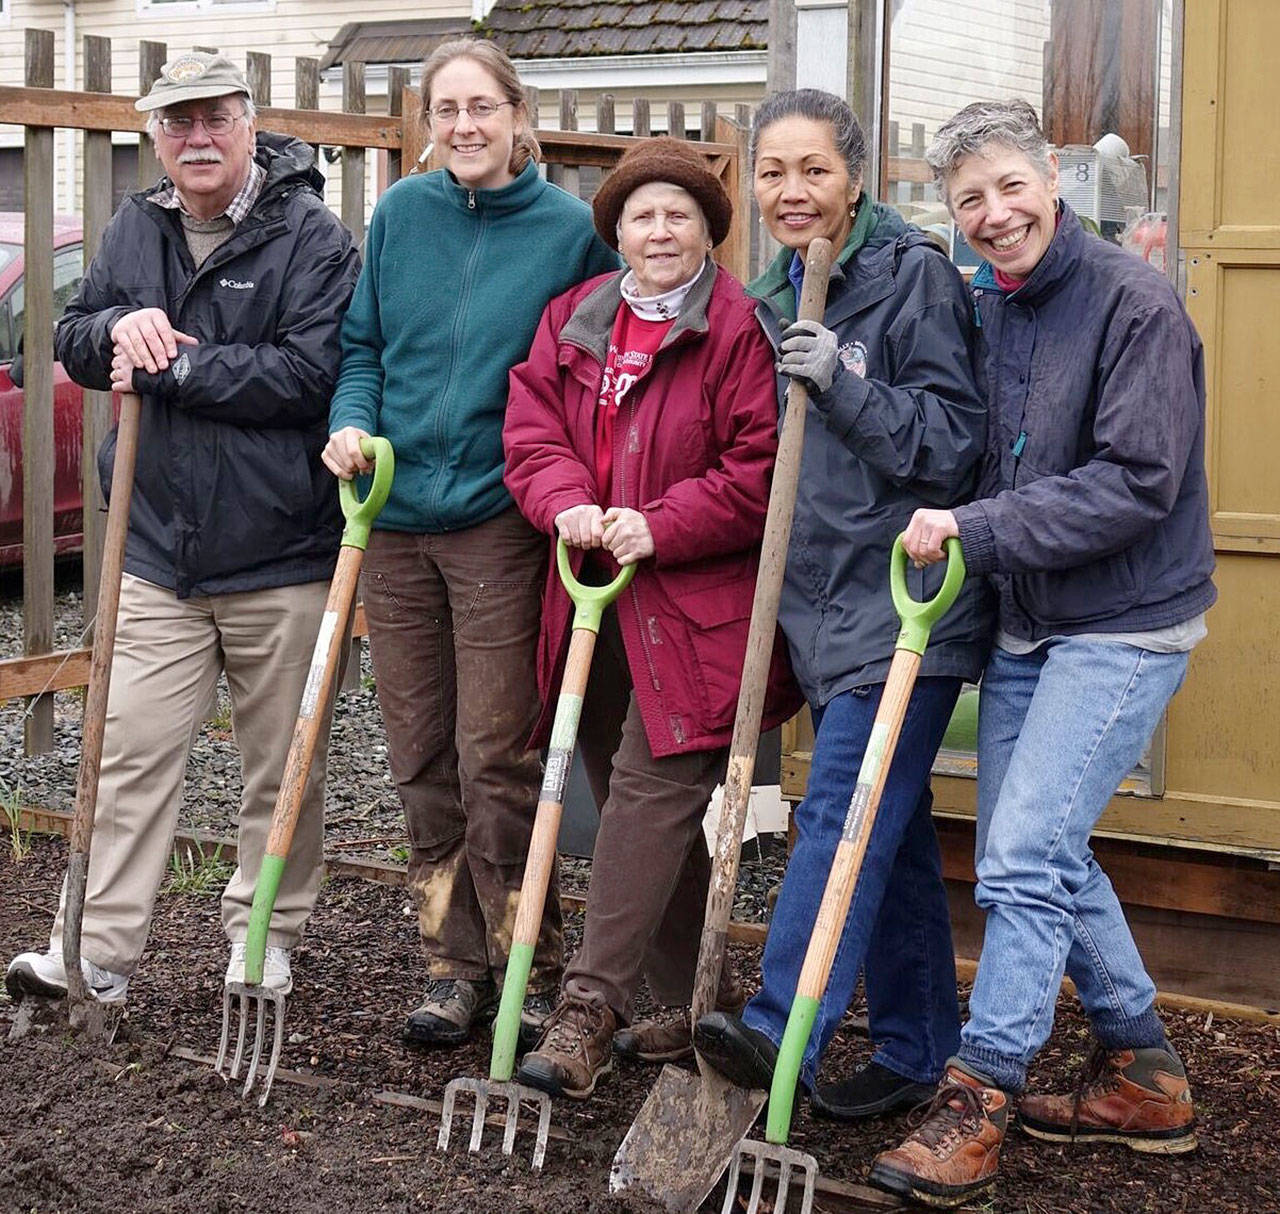 Veteran Master Gardeners Bob Cain, Laurel Moulton, Lois Bellamy, Audreen Williams and Jeanette Stehr-Green will lead a walk through the Fifth Street Community Garden on May 13. Submitted photo